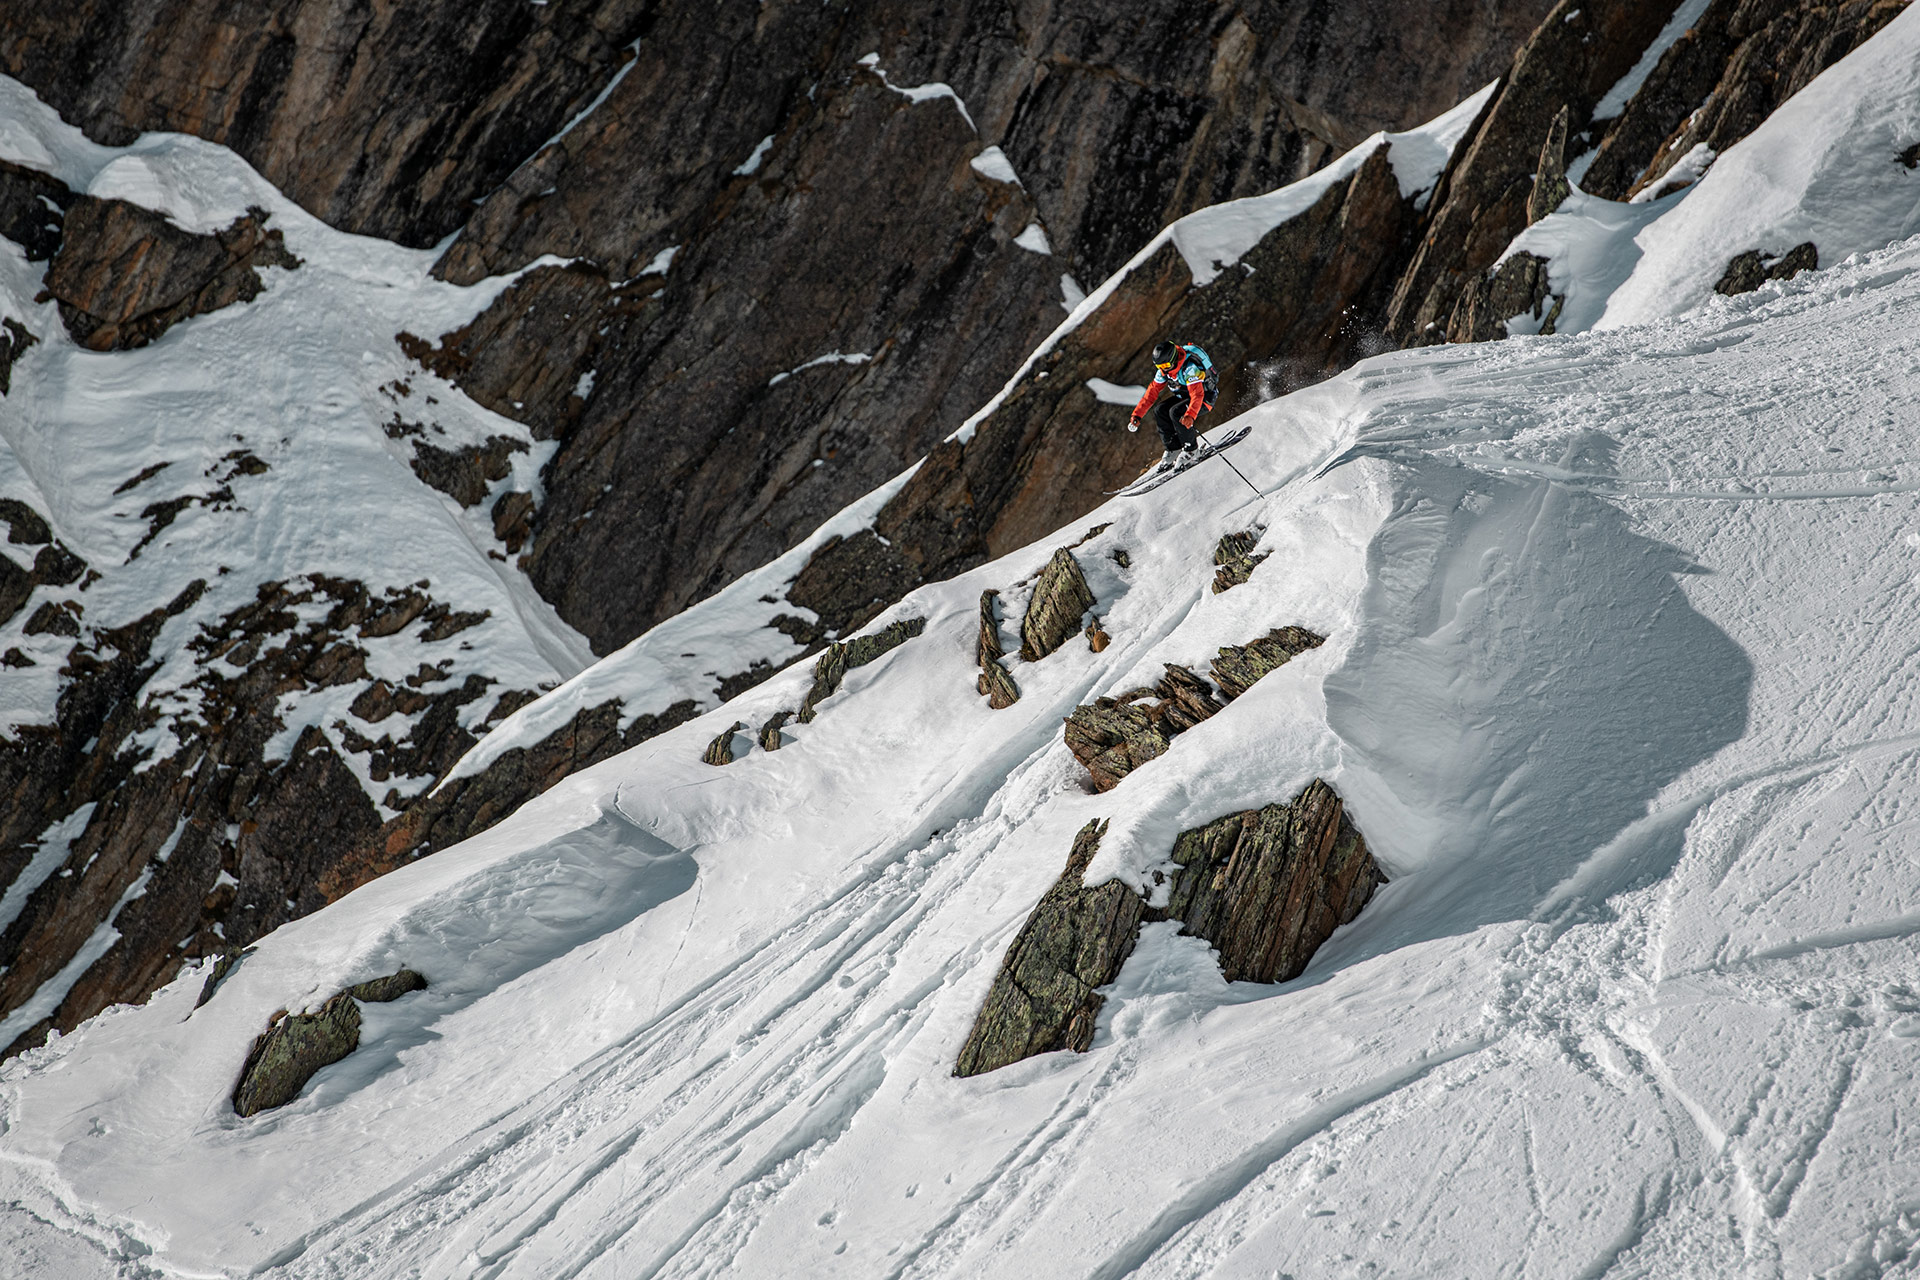 Laura Überbacher sends a drop at the 2022 Open Faces Freeride contest in Kappl, Austria